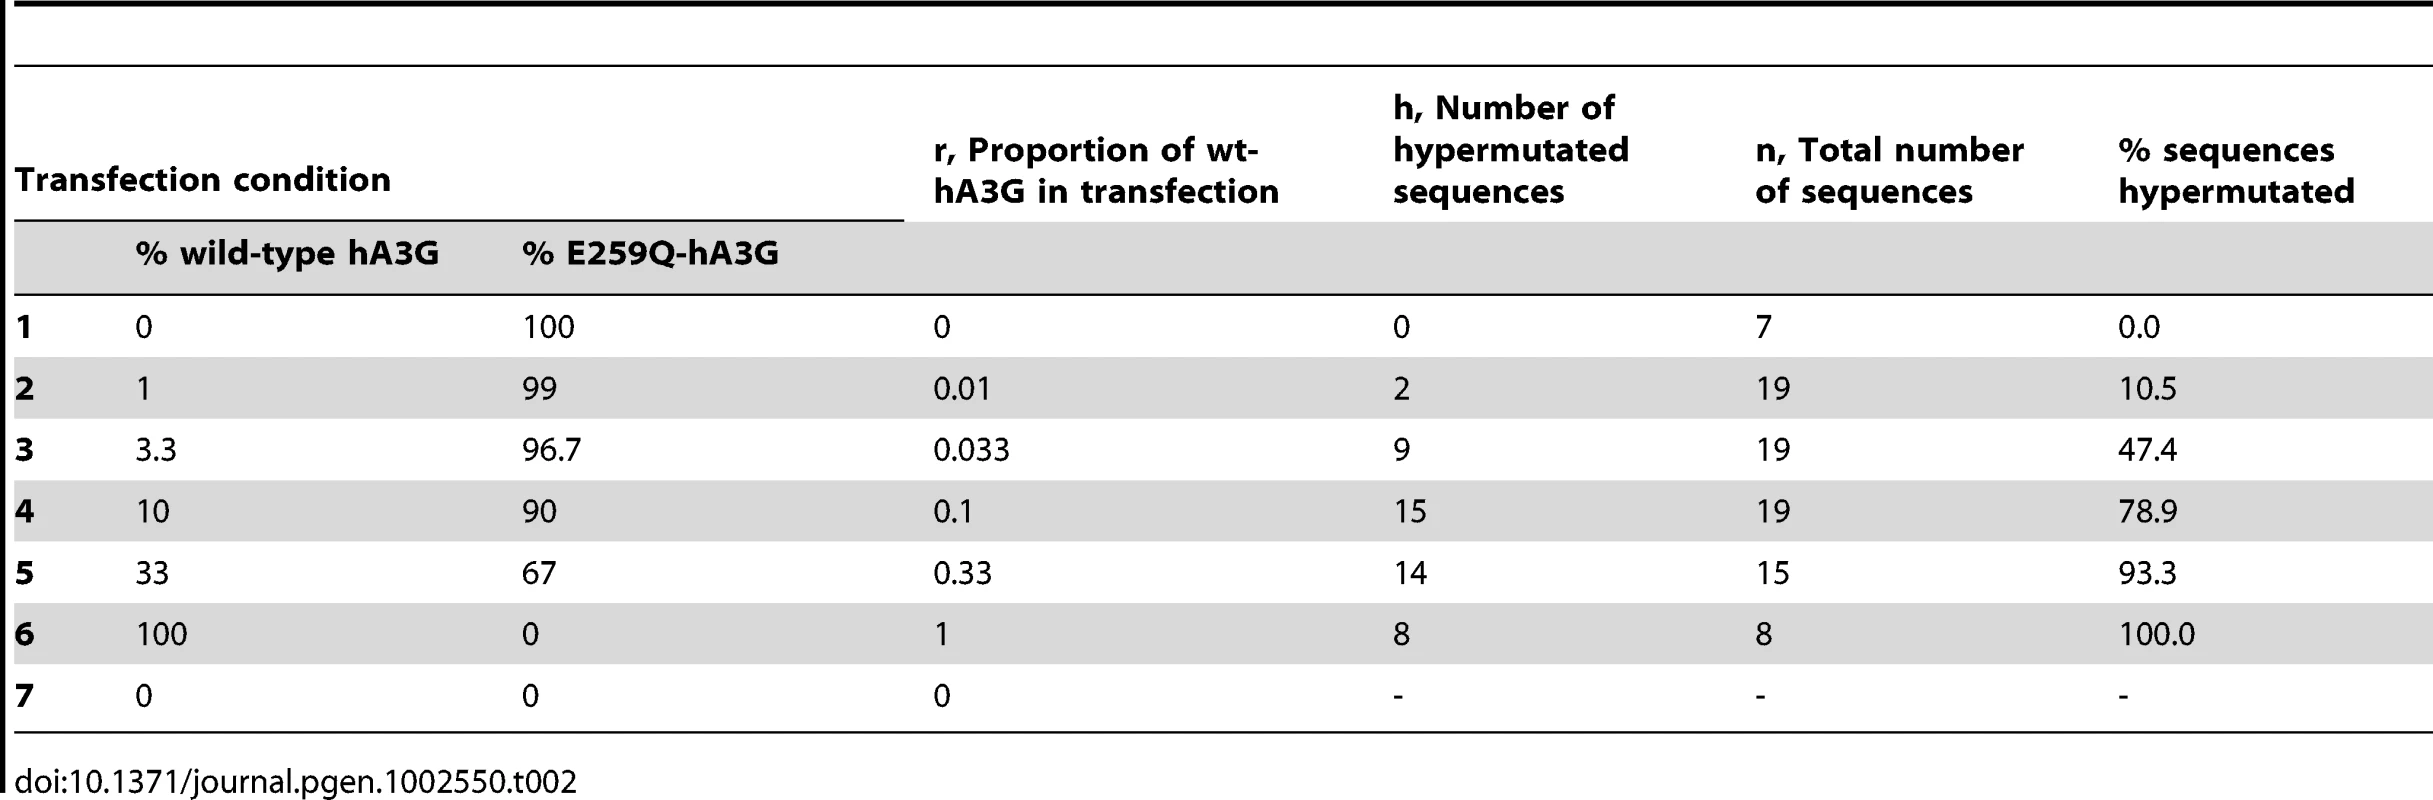 Transfection condition and hypermutation results.